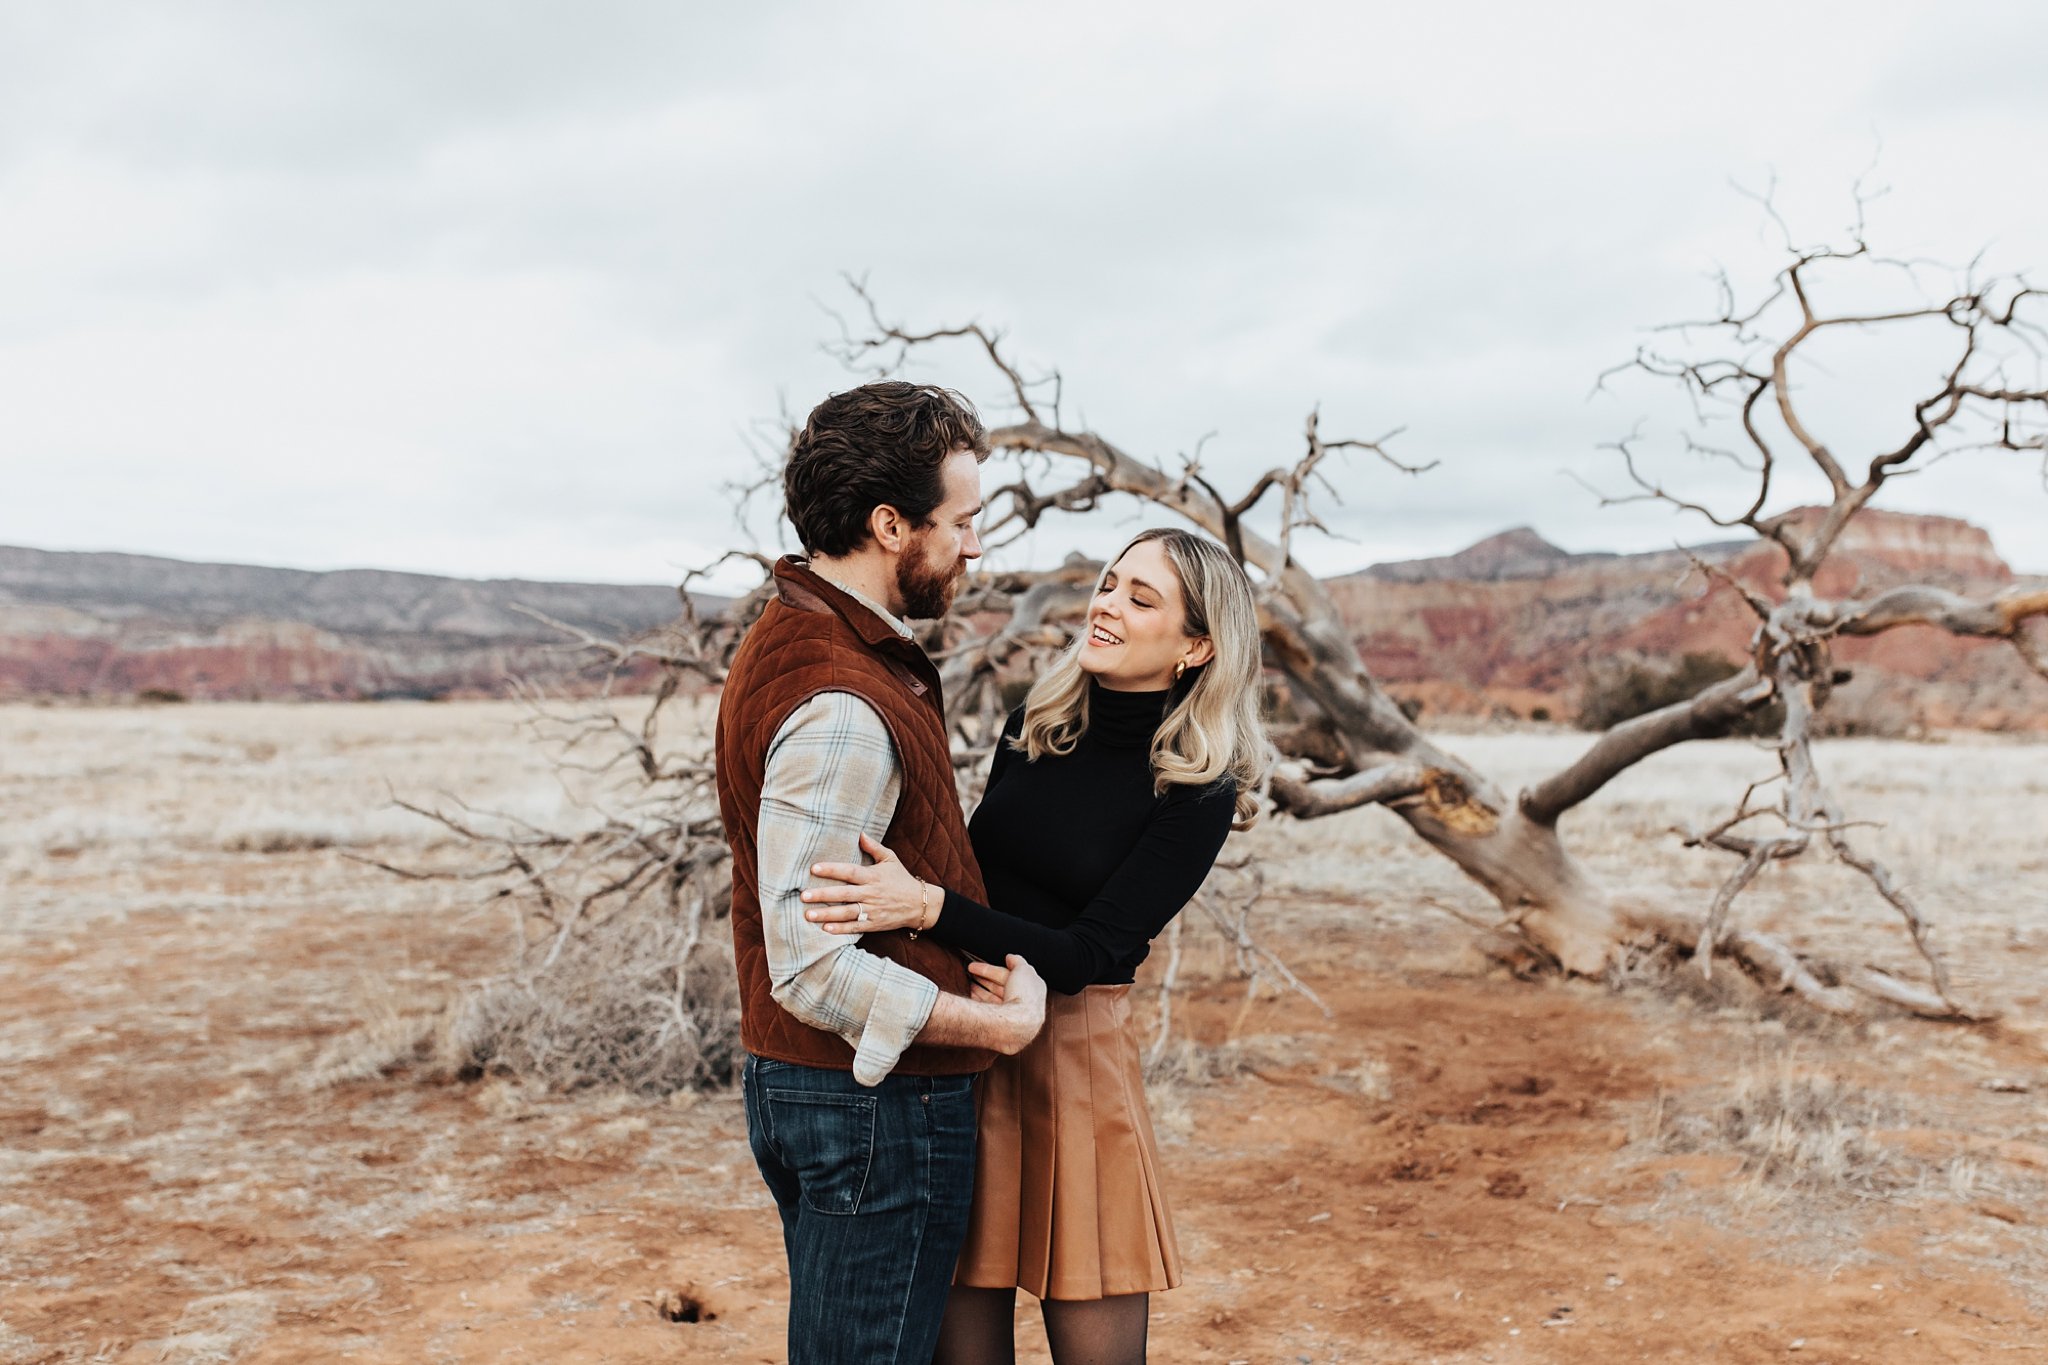 Alicia+lucia+photography+-+albuquerque+wedding+photographer+-+santa+fe+wedding+photography+-+new+mexico+wedding+photographer+-+new+mexico+wedding+-+southwest+engagement+-+ghost+ranch+engagement+-+ghost+ranch+wedding_0054.jpg